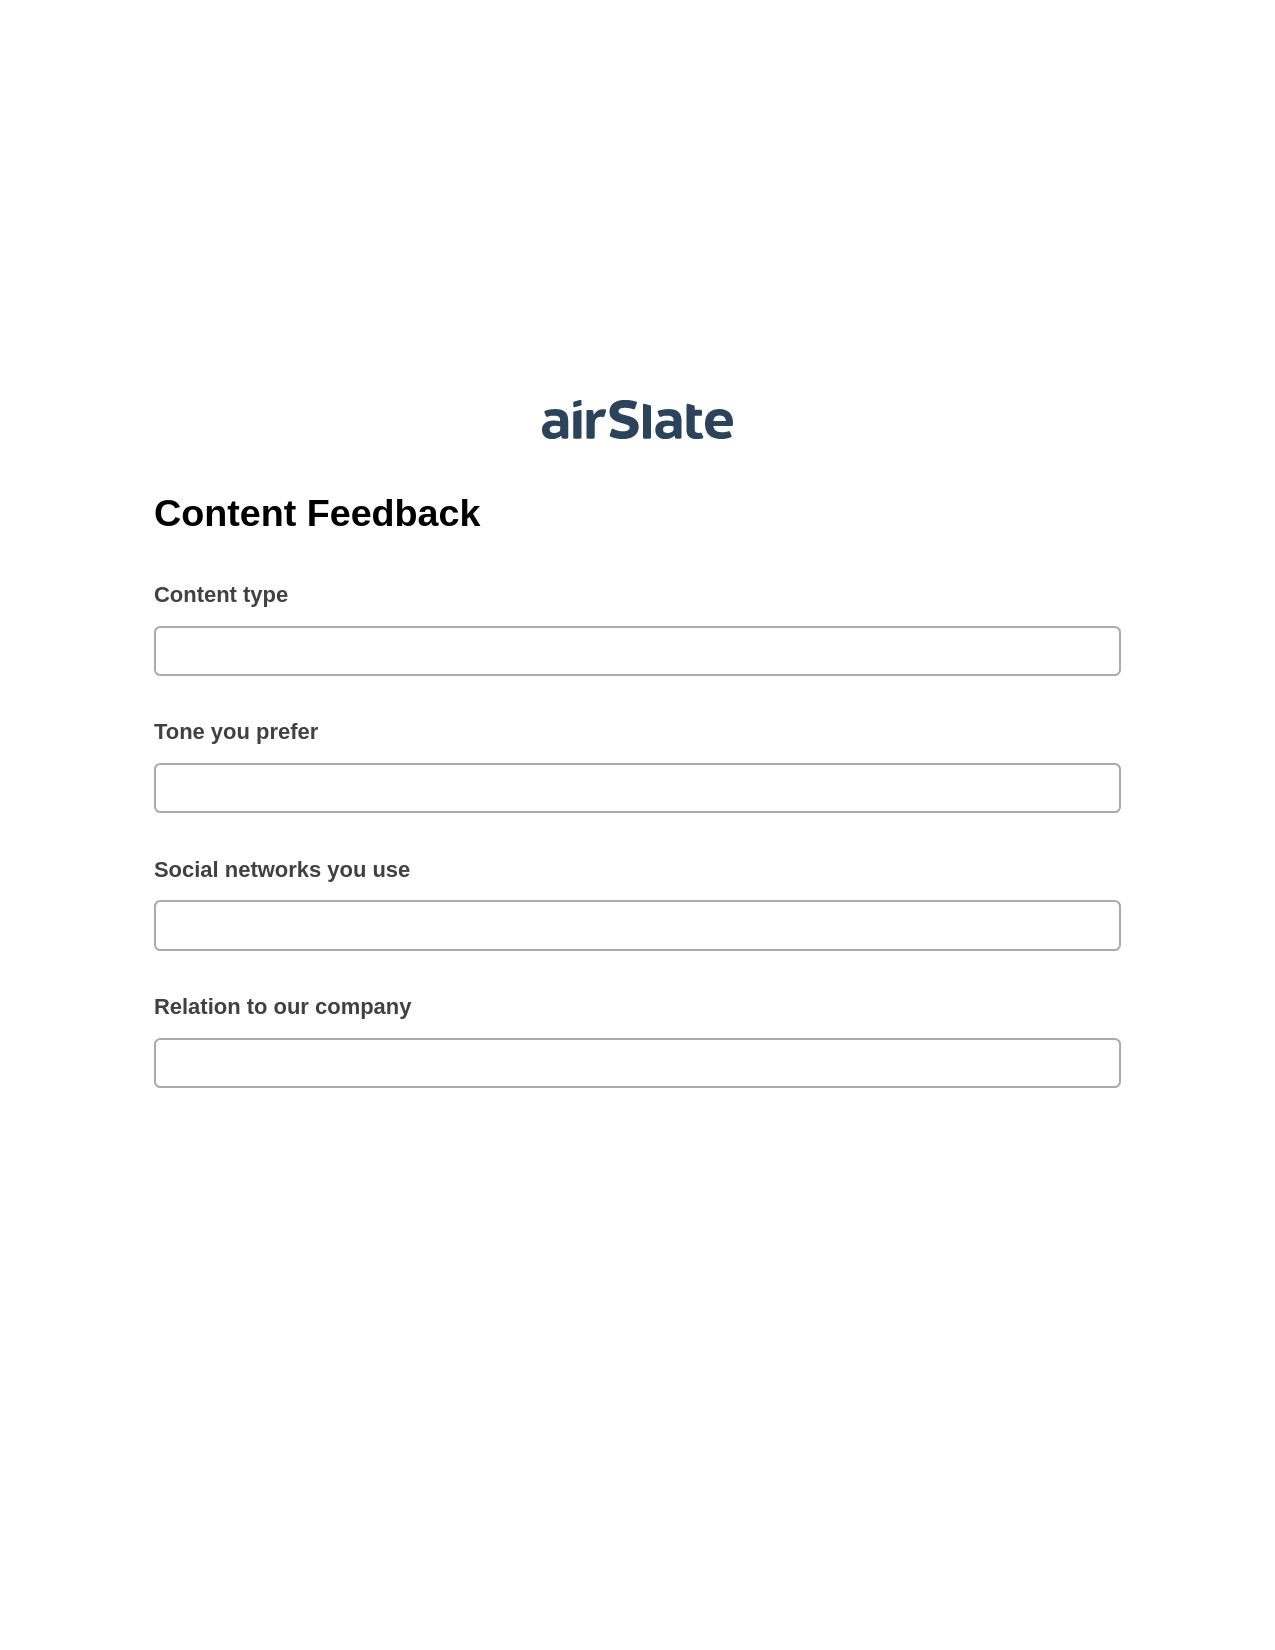 Content Feedback Pre-fill from CSV File Bot, Lock the slate bot, Archive to SharePoint Folder Bot